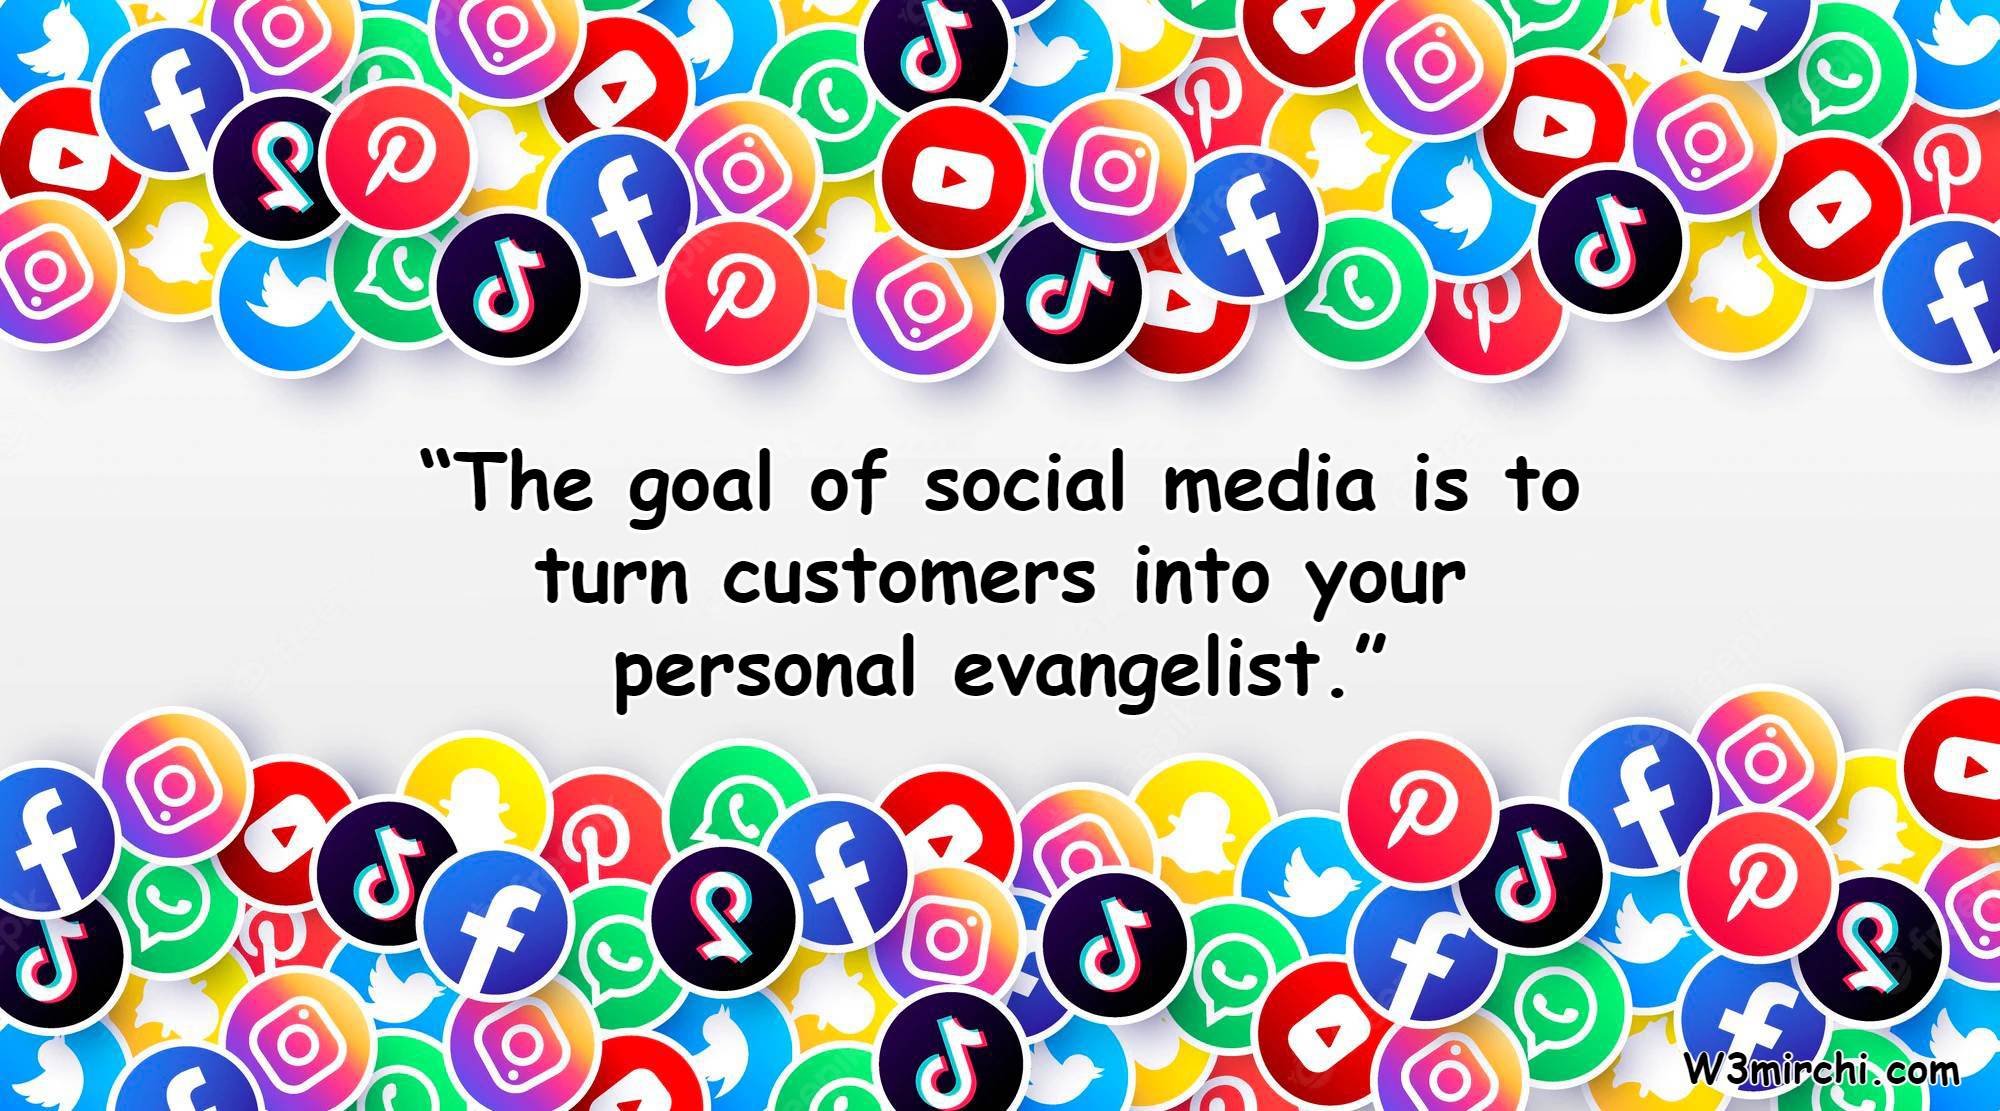 “The goal of social media is to turn